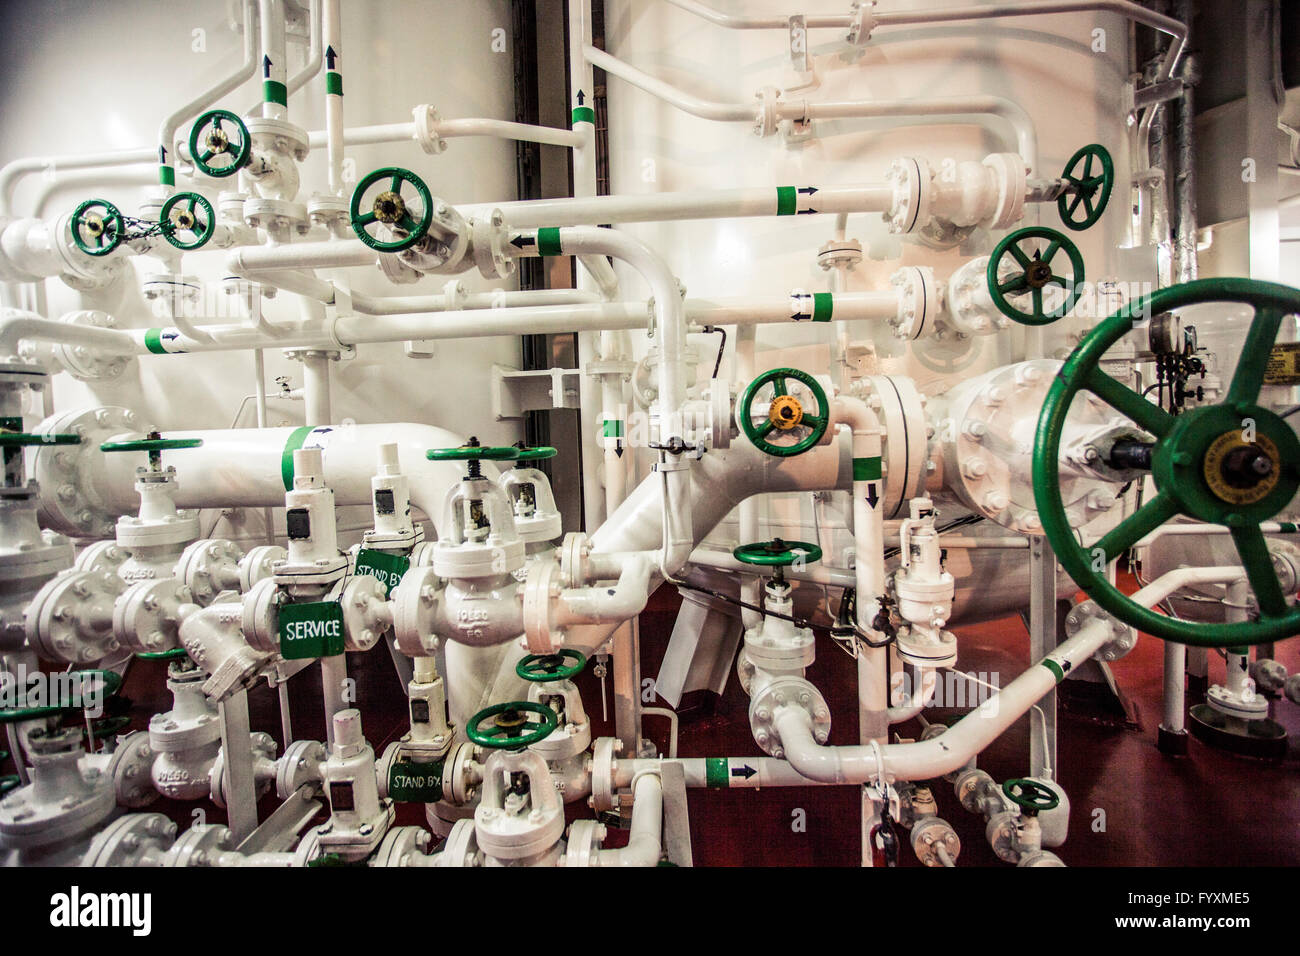 Maze of pipes dedicated to life support systems on board a container ship. Stock Photo